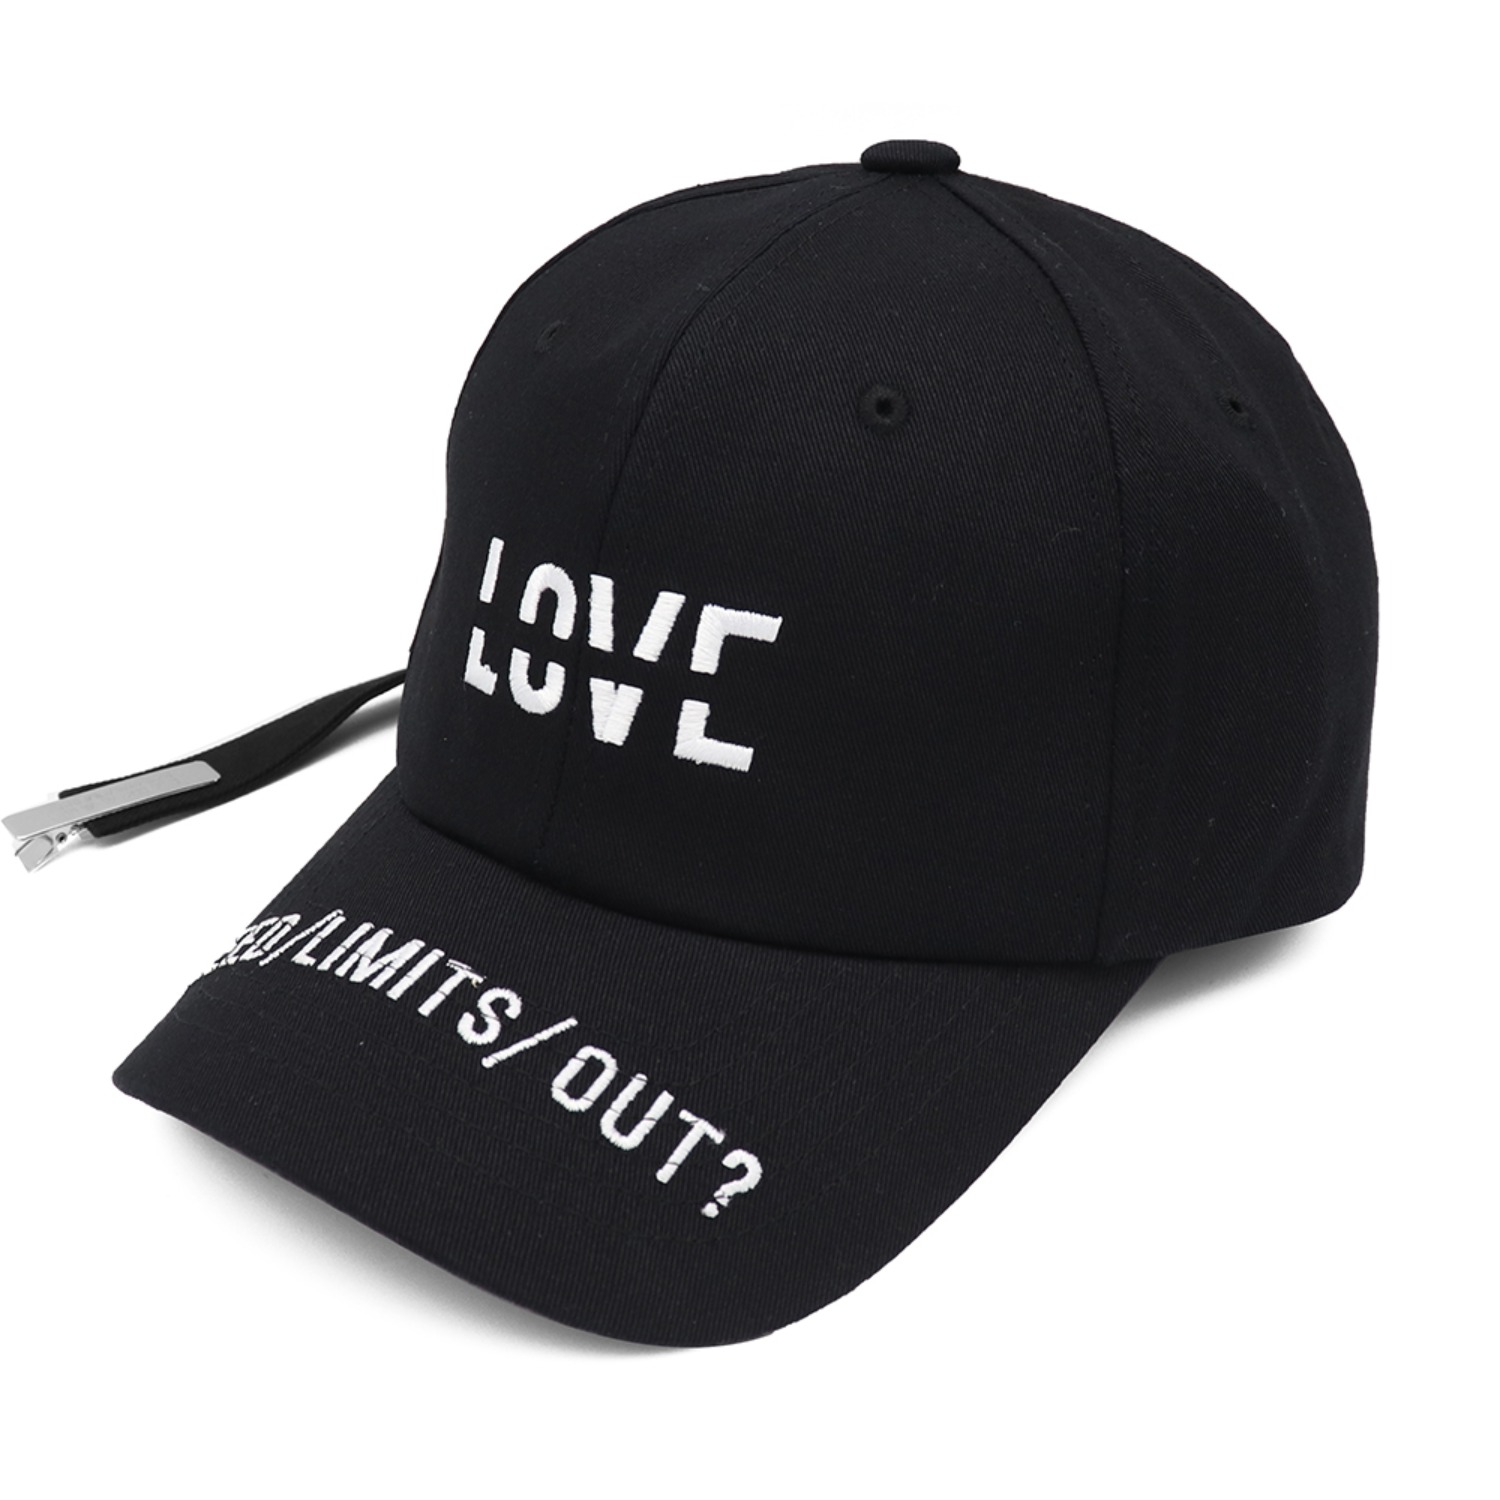 Love Limits (with metal clip)